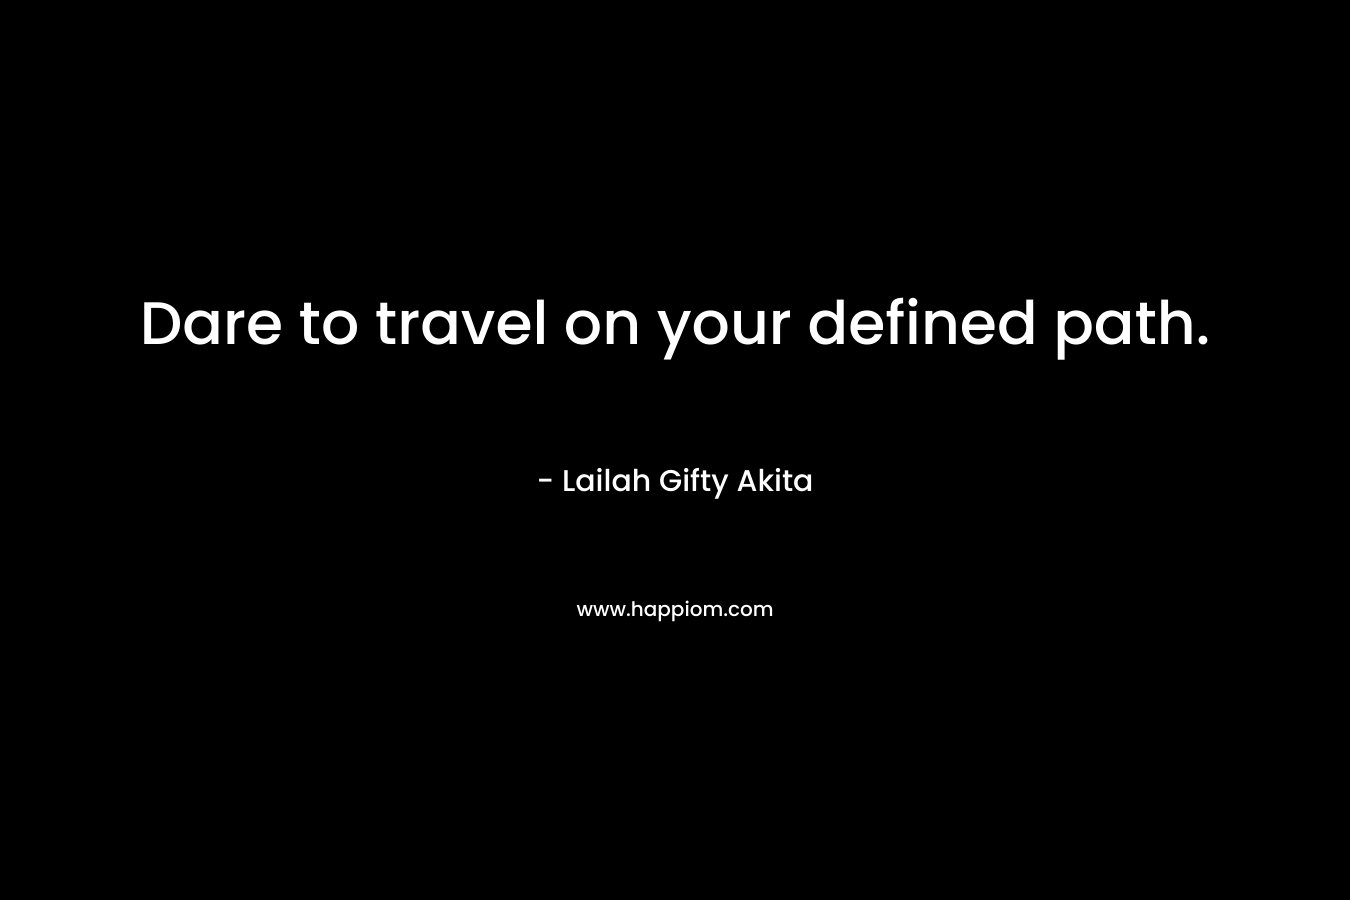 Dare to travel on your defined path.